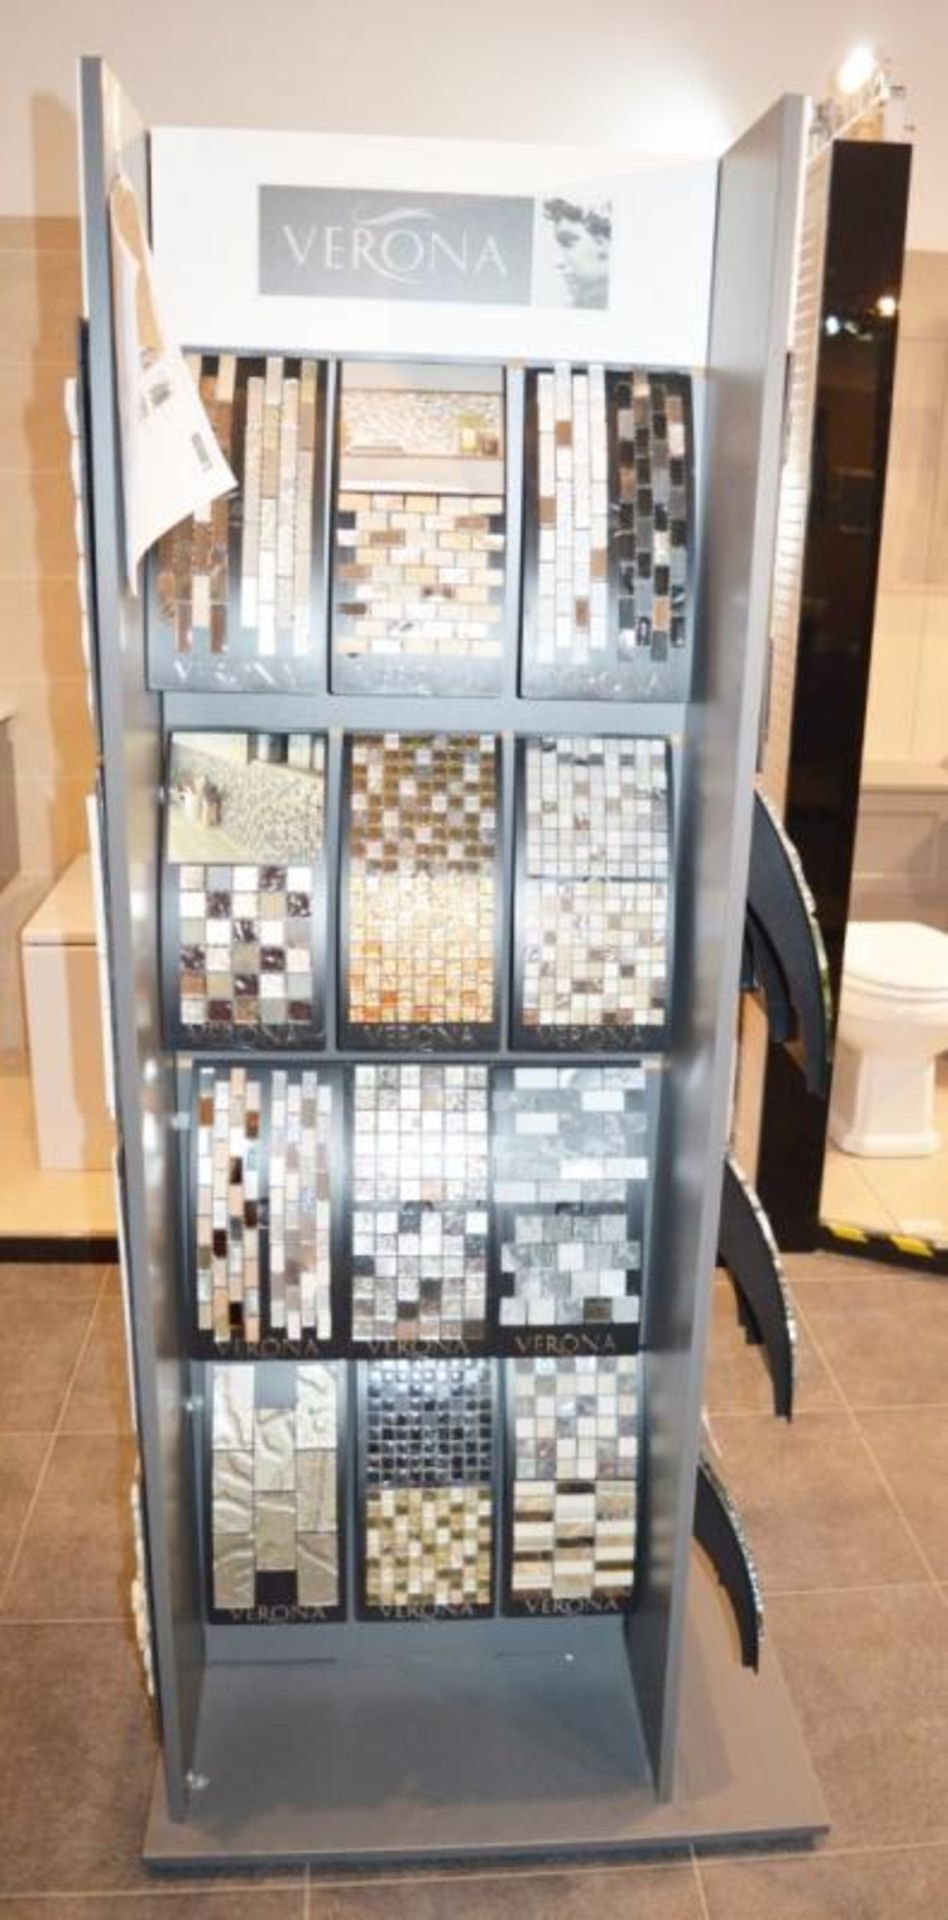 1 x Verona Tile Display Unit With Sample Stock - H184 x W84 x D65 cms - CL406 - Ref H226 - Ex - Image 9 of 11